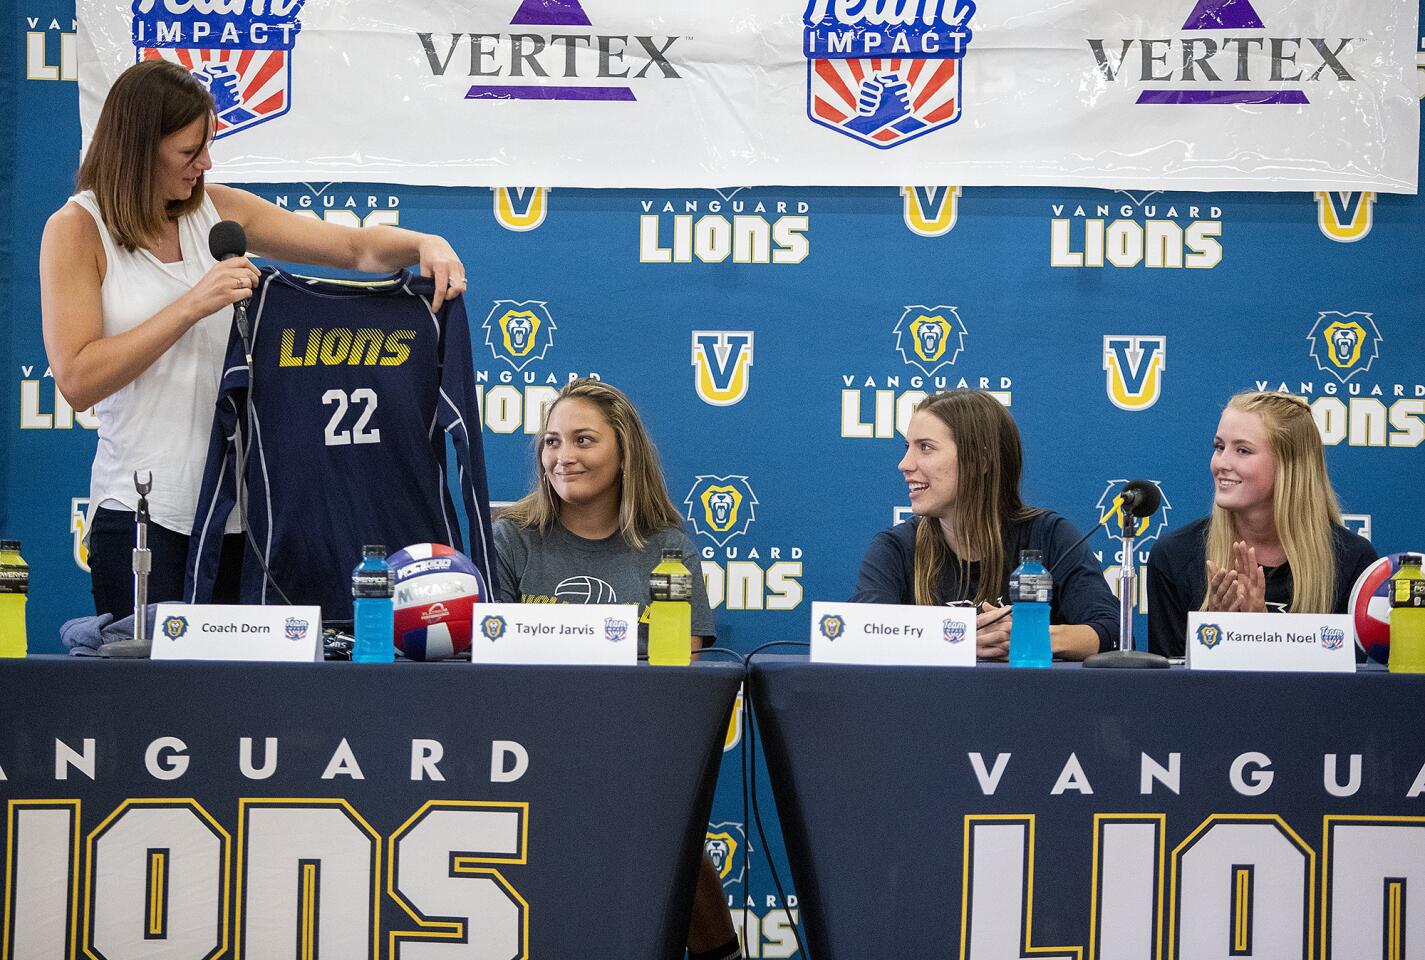 Vanguard University women's volleyball coach Jennifer Dorn presents Taylor Jarvis, 15, of Fountain Valley with a jersey during a "draft day" for her Thursday. Taylor, who has been living with Type 1 diabetes since she was a year old, is joining the team as an honorary member this school year.